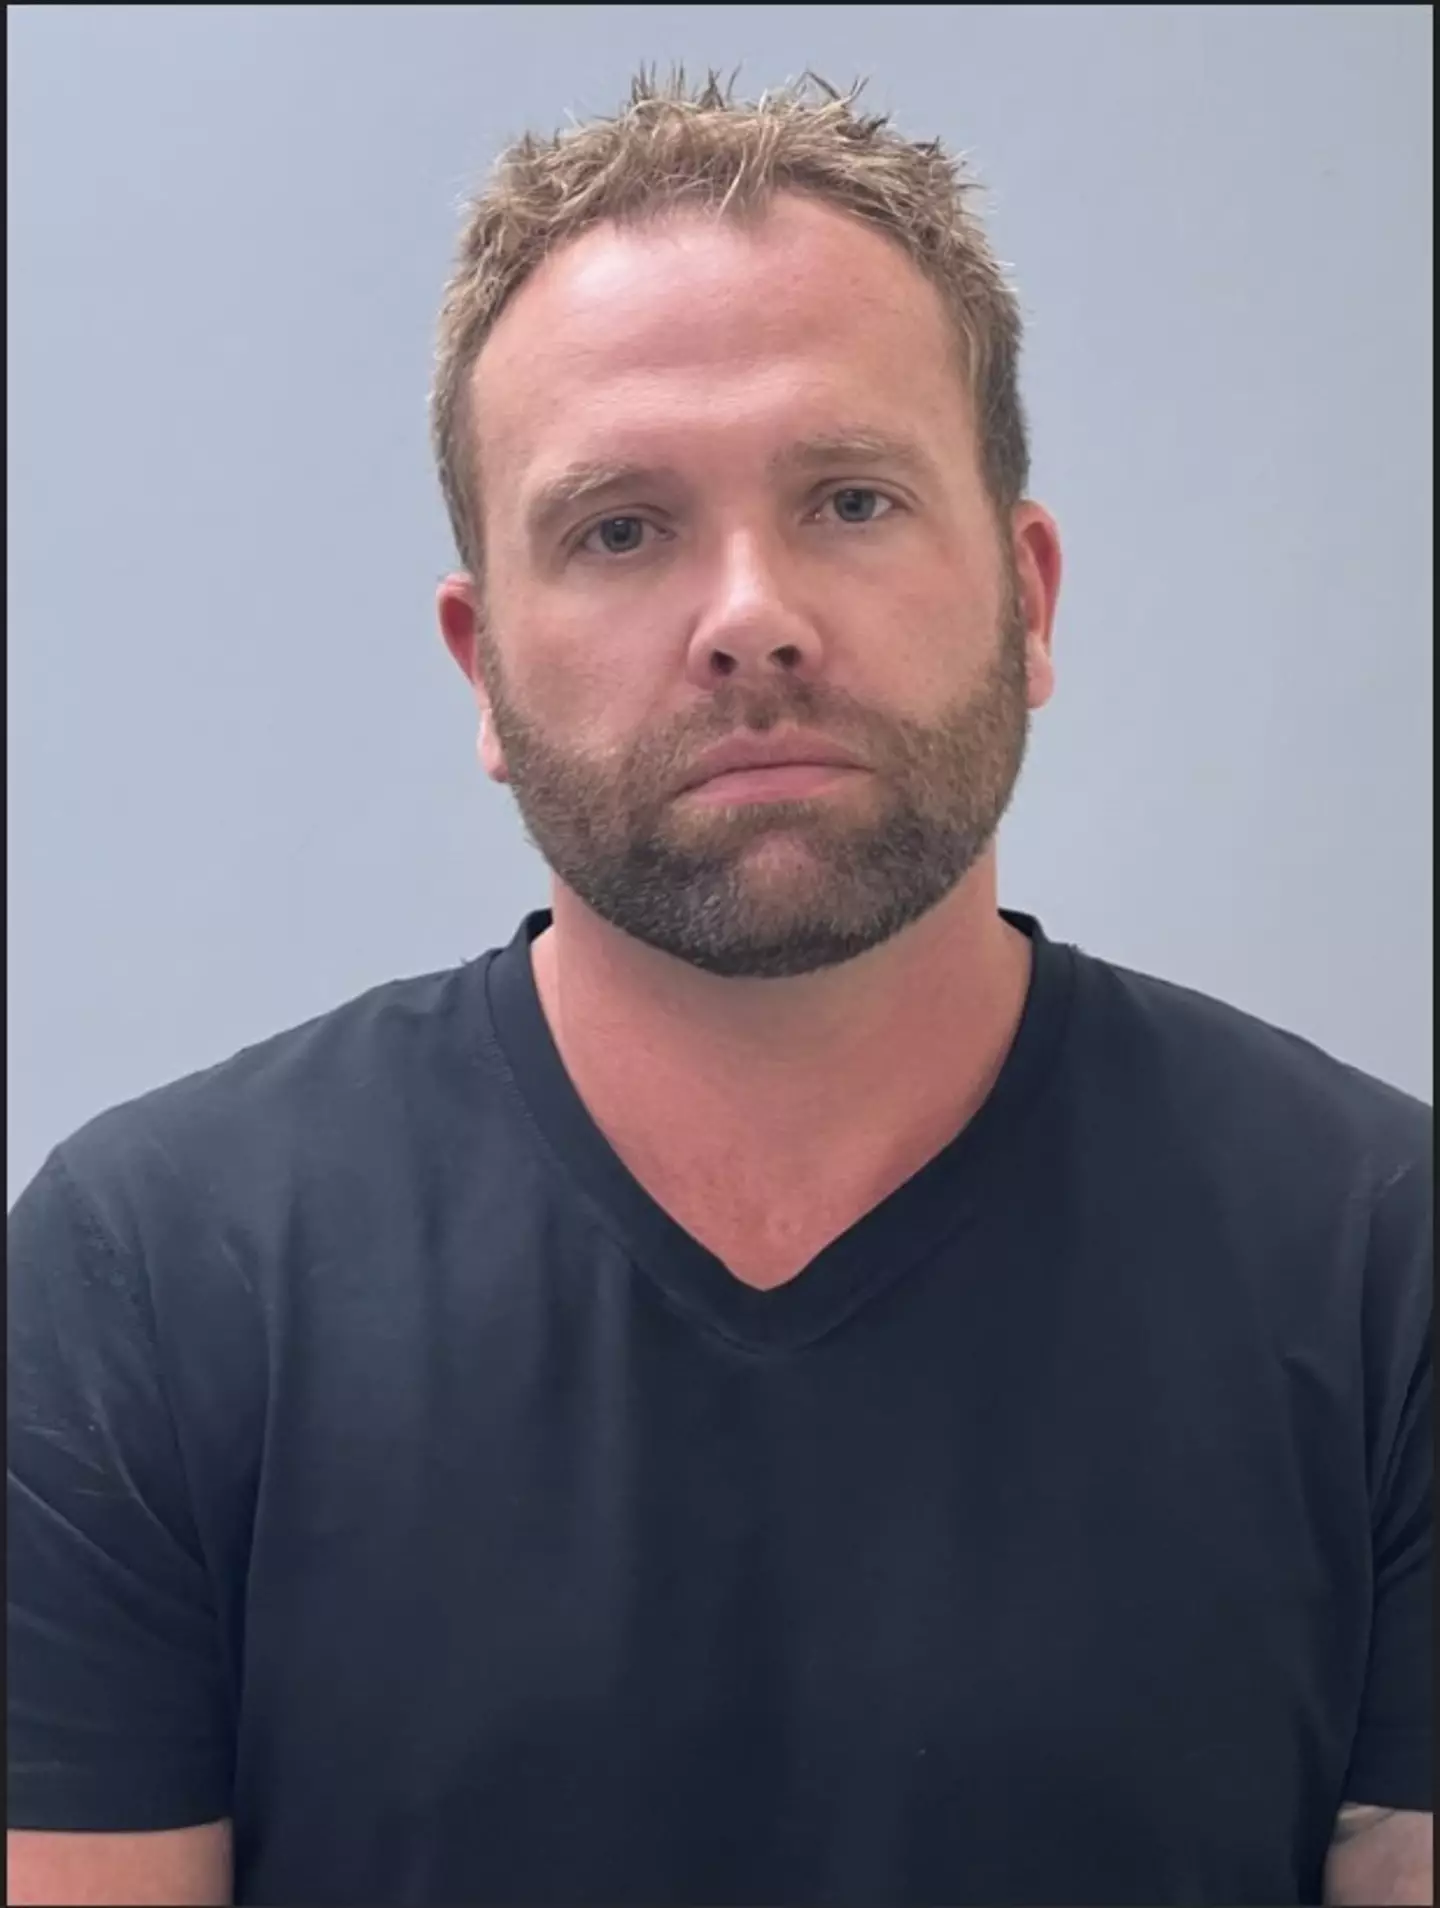 Plastic surgeon Benjamin Brown has been charged in connection with the death of his wife. (Santa Rosa County Sheriff's Office FL)